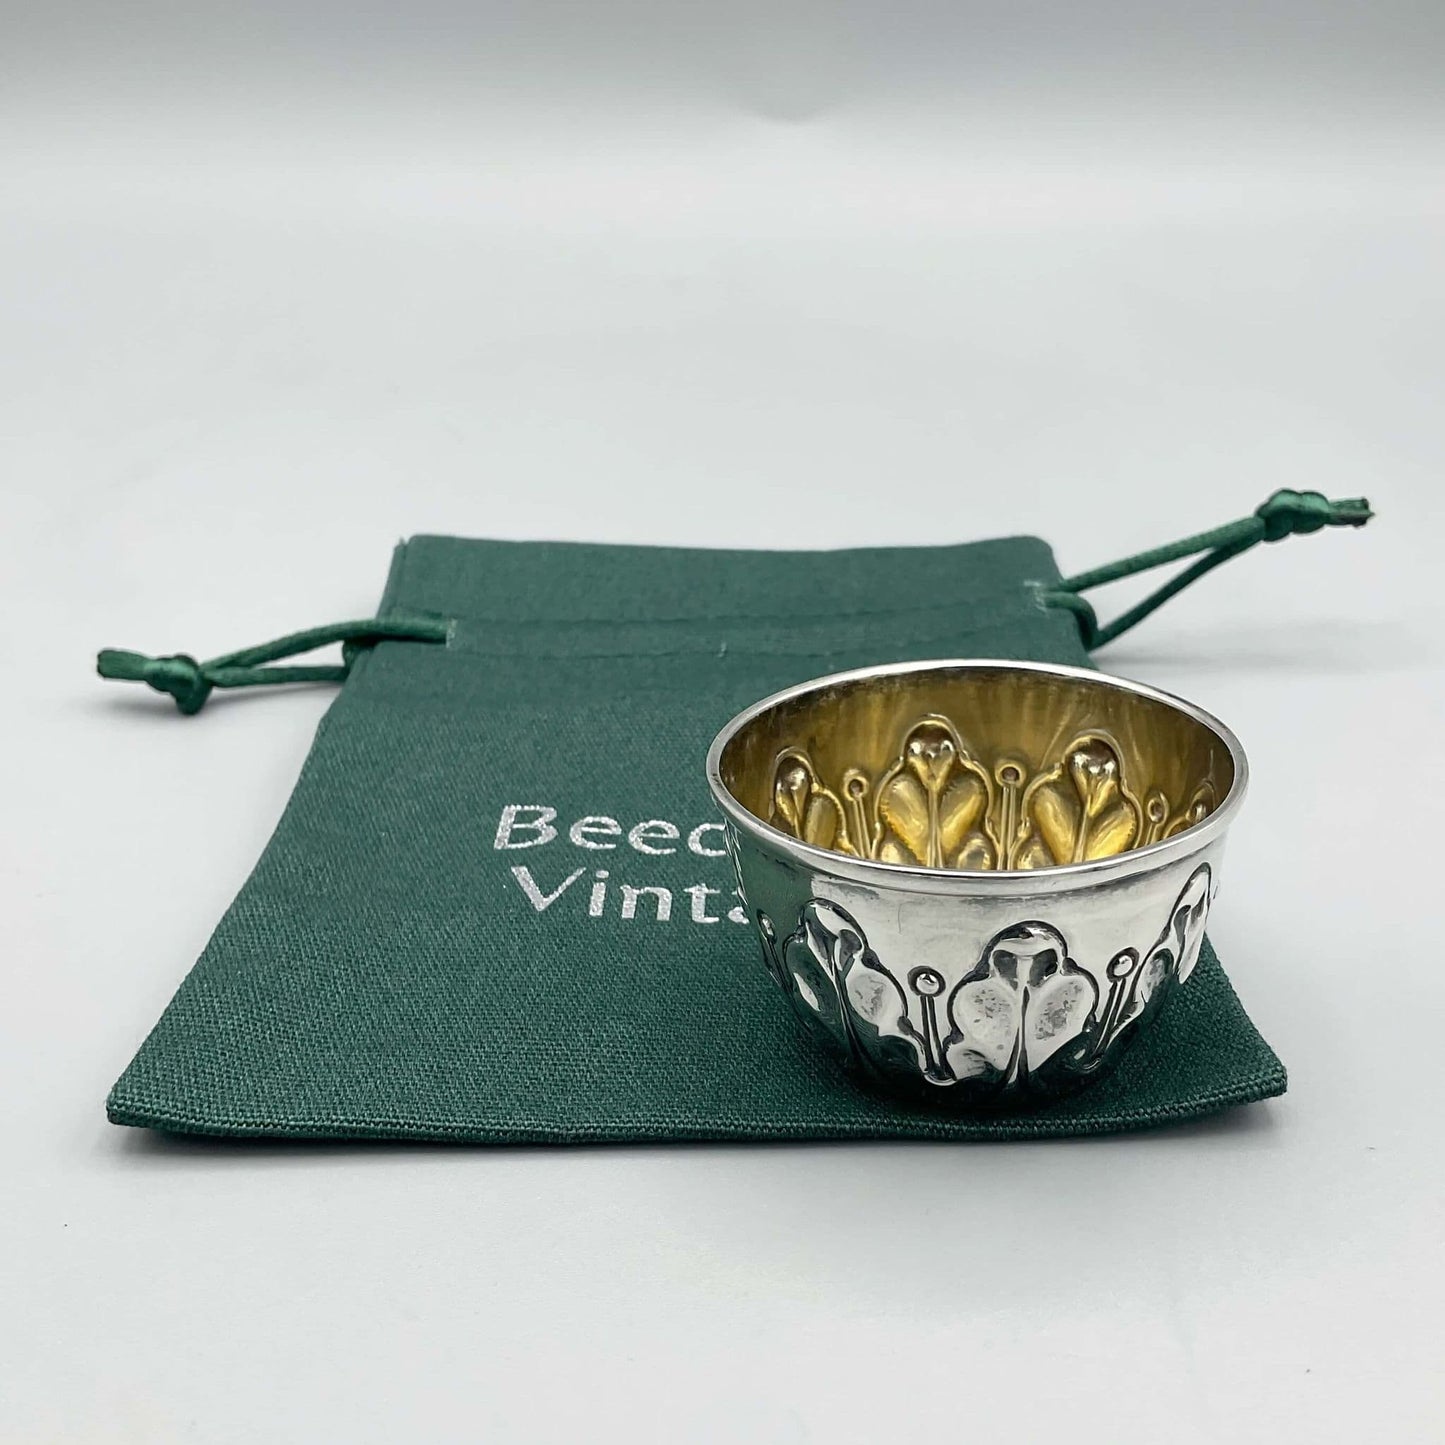 Antique Silver Salt pot with wavy design on outside and gilded interior sitting on green cotton bag